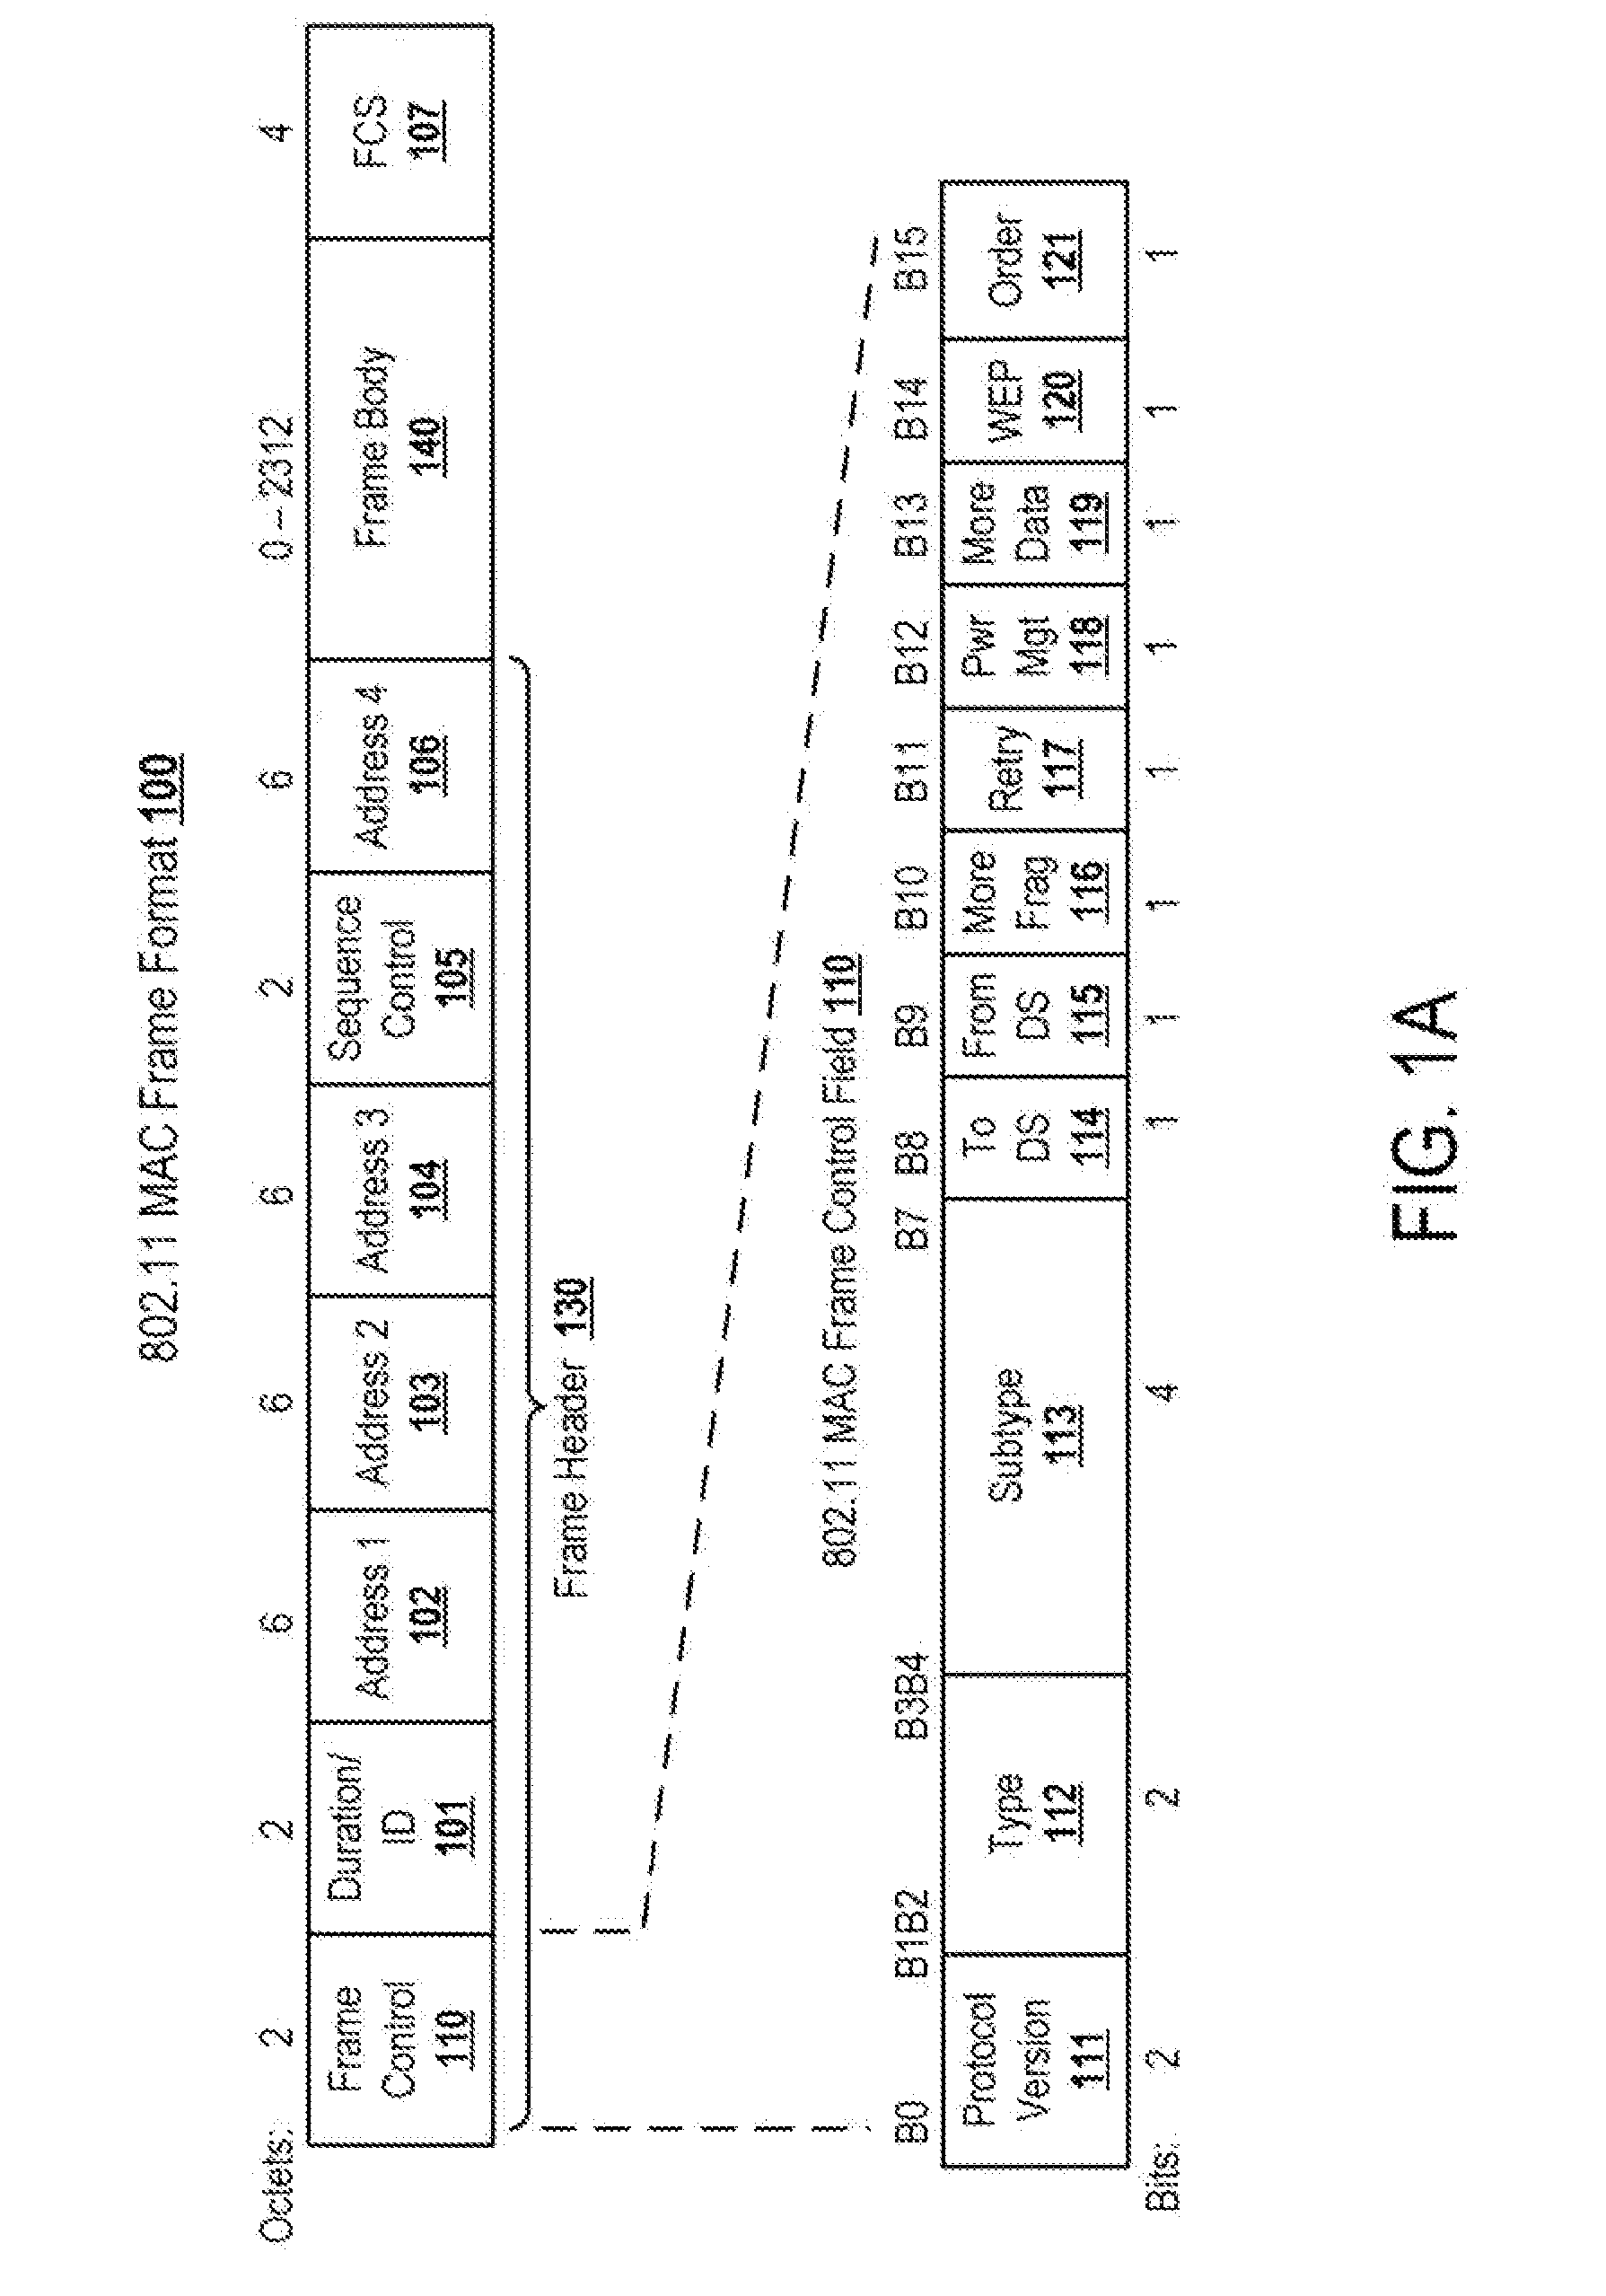 Systems and Methods for Wireless Network Content Filtering